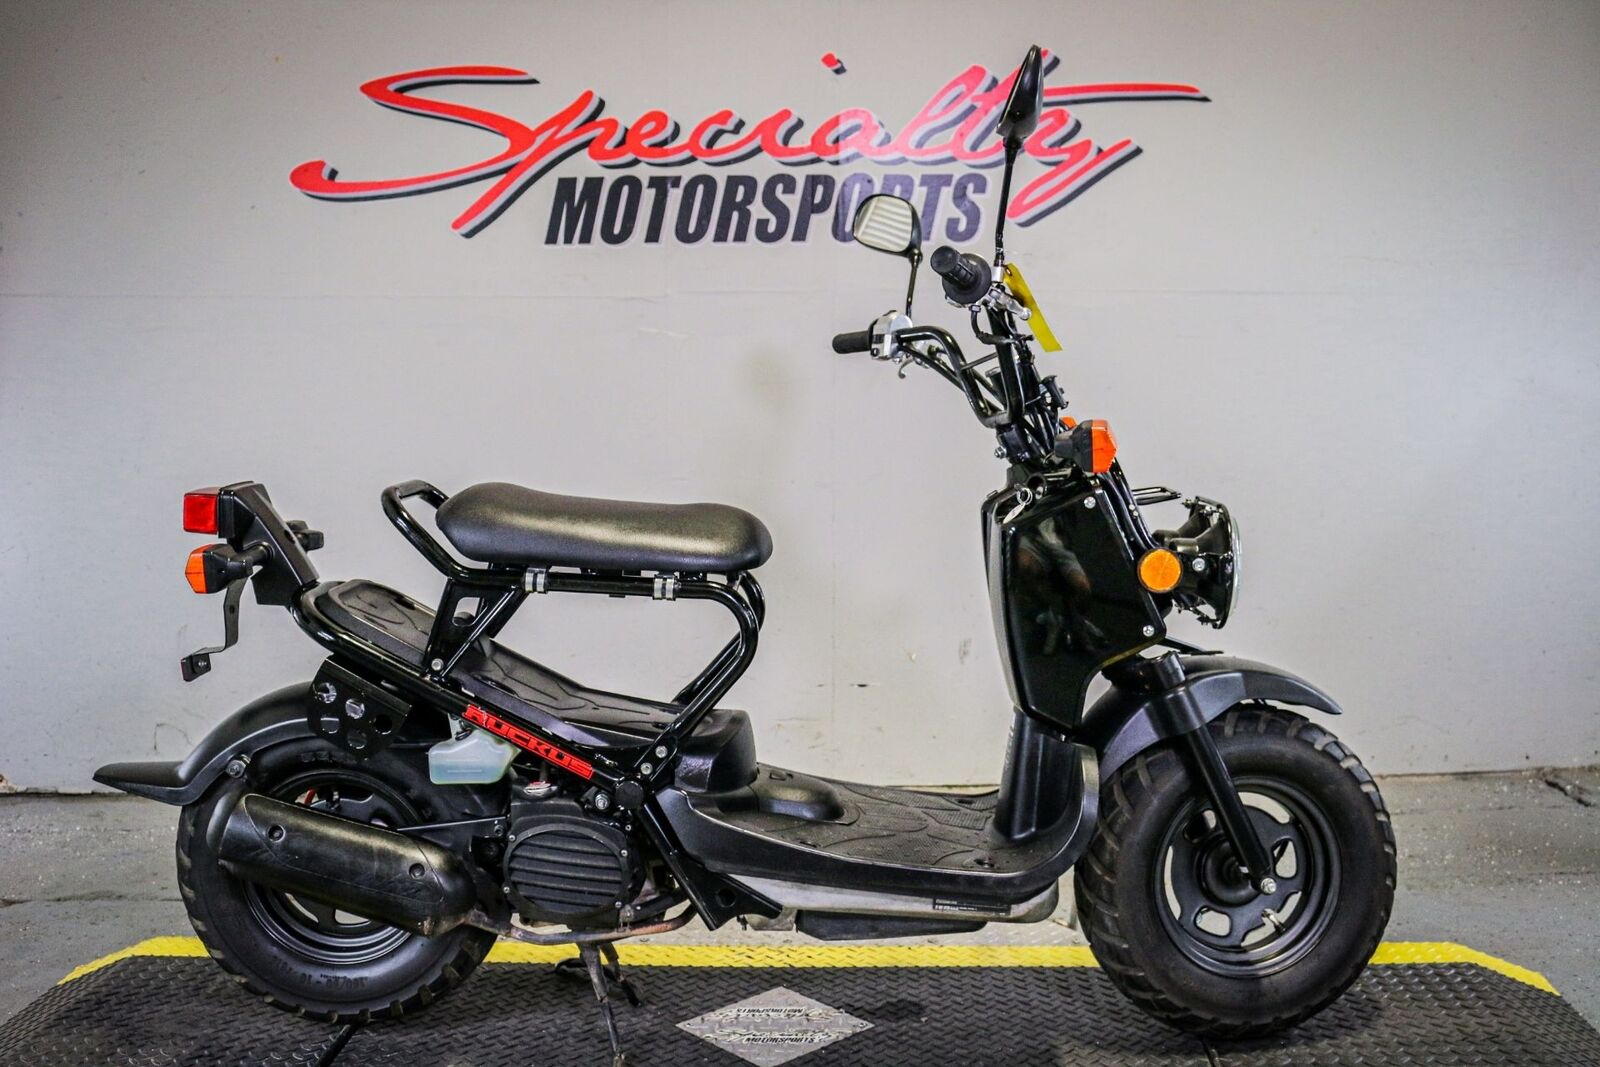 Honda Ruckus® Black with 7701 Miles, for sale!